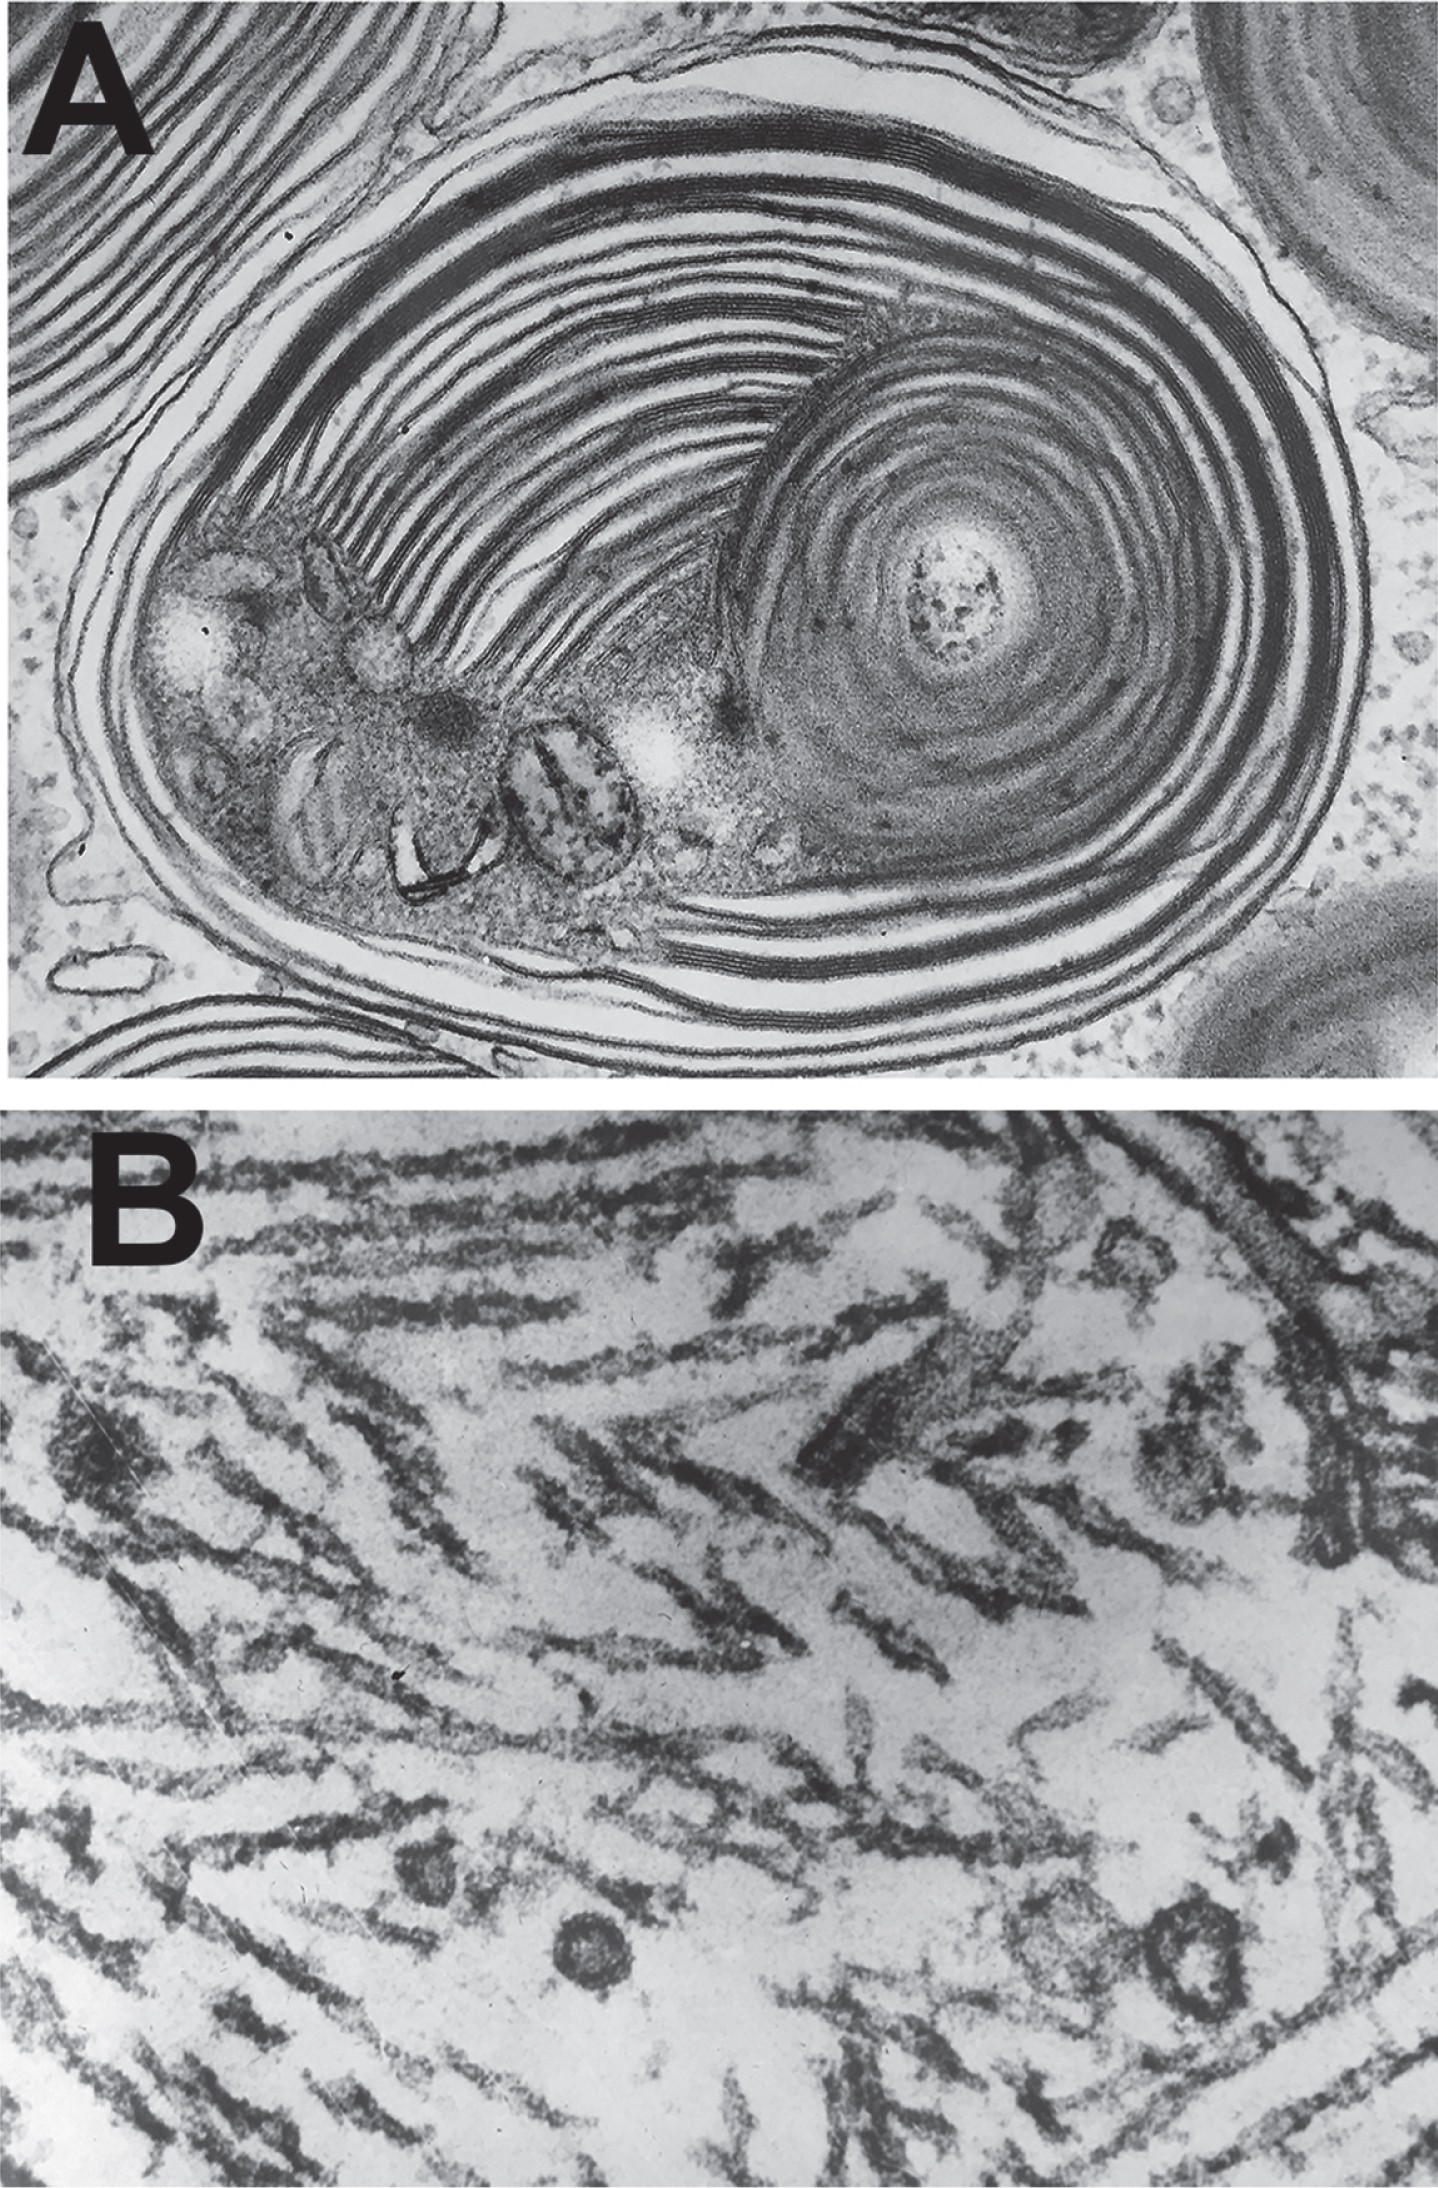 Bob Terry’s classical electron micrographs of (A) an abnormal lysosome in Tay Sachs Disease and (B) paired helical filaments in the neurofibrillary tangles in Alzheimer’s disease.